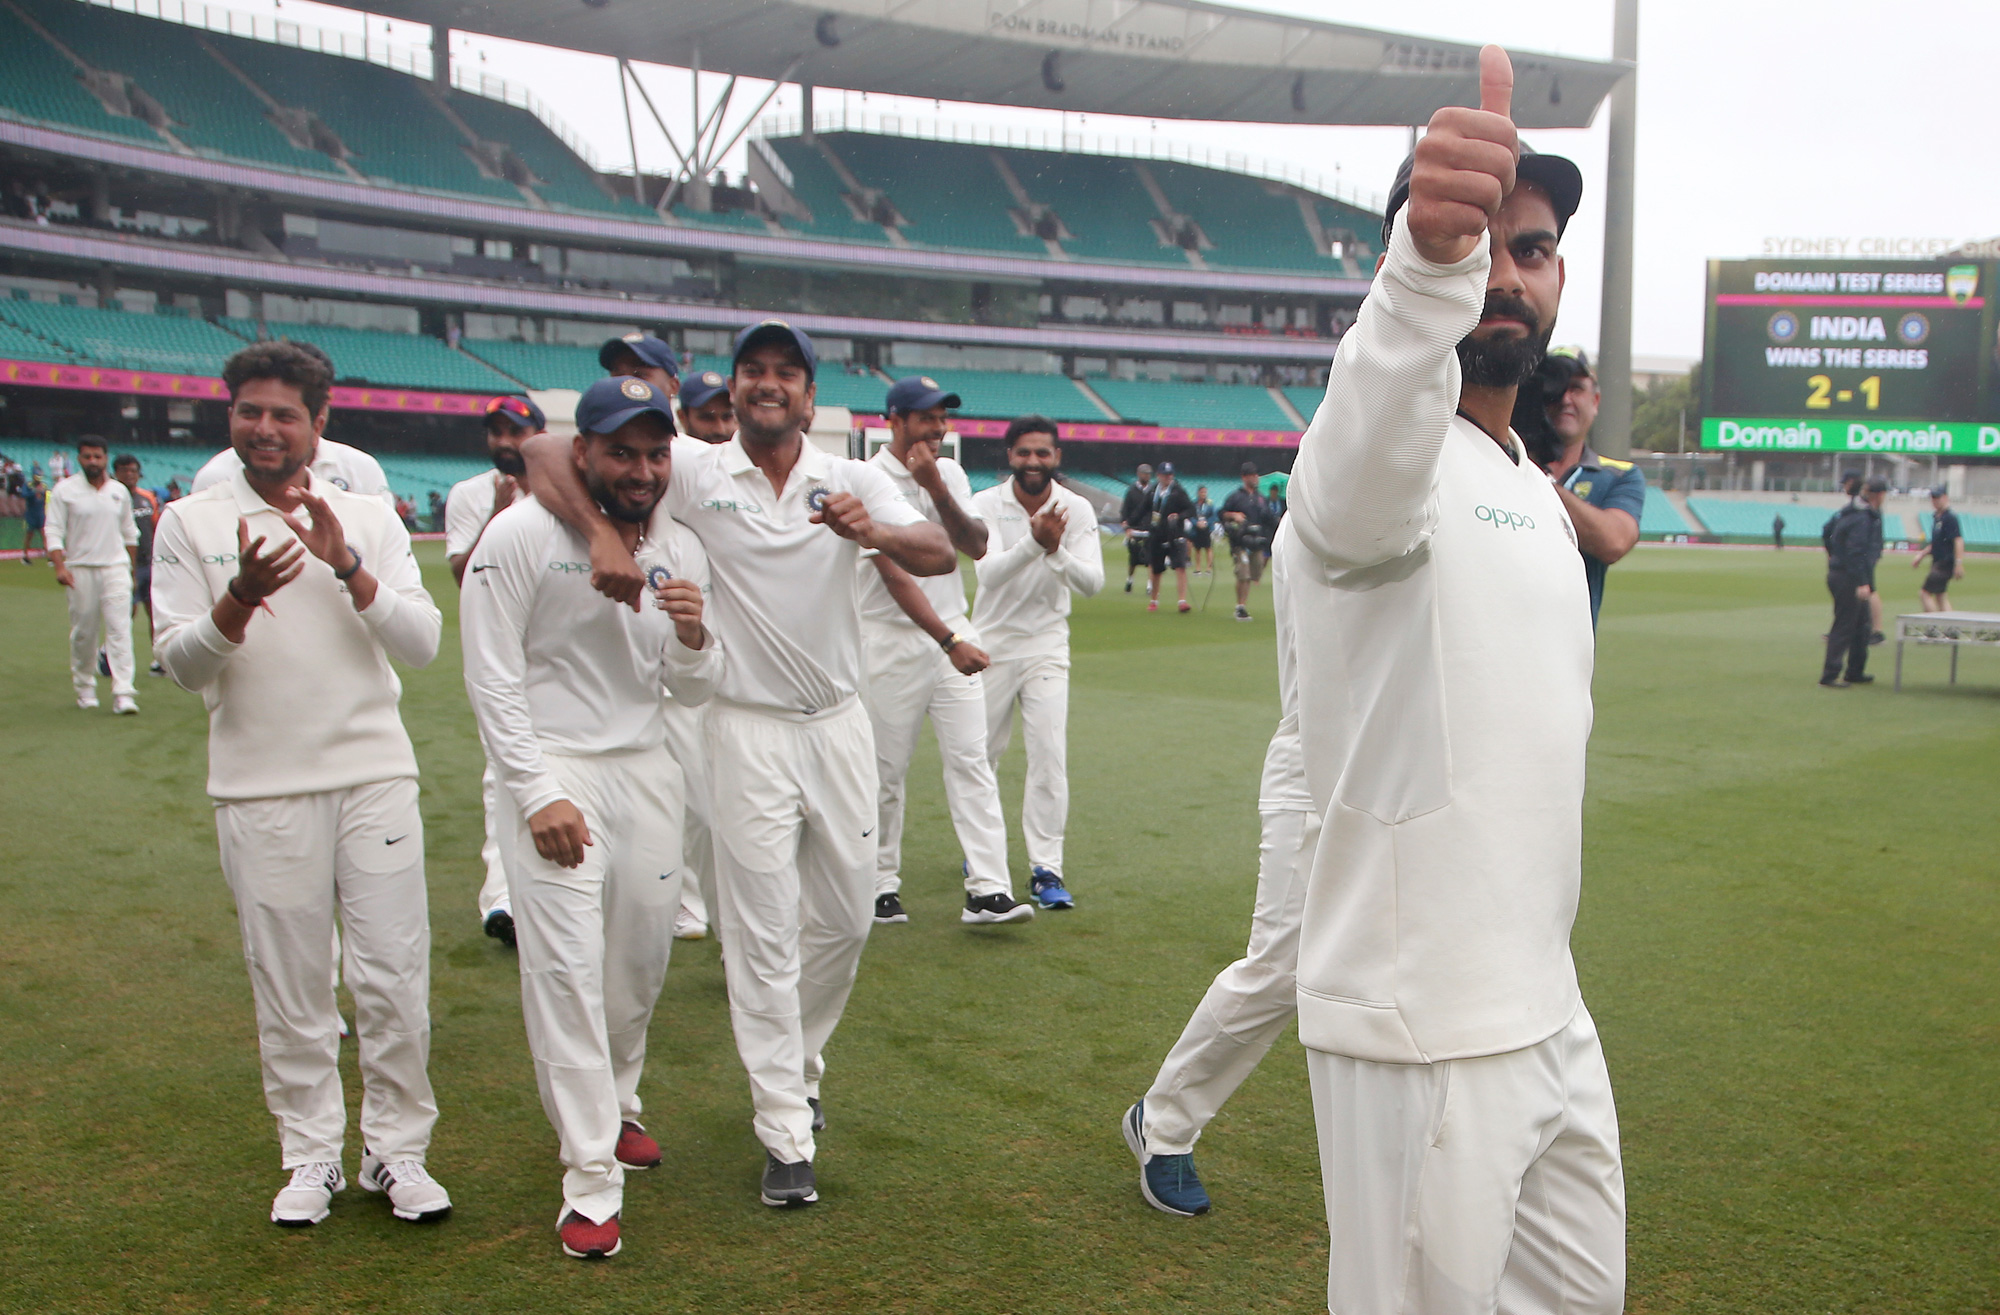 Captain Virat Kohli, right, celebrates with teammates after India's series win when play was called off on day 5 of their cricket test match in Sydney, Monday, January 7. The match was a draw and India won the series 2-1.